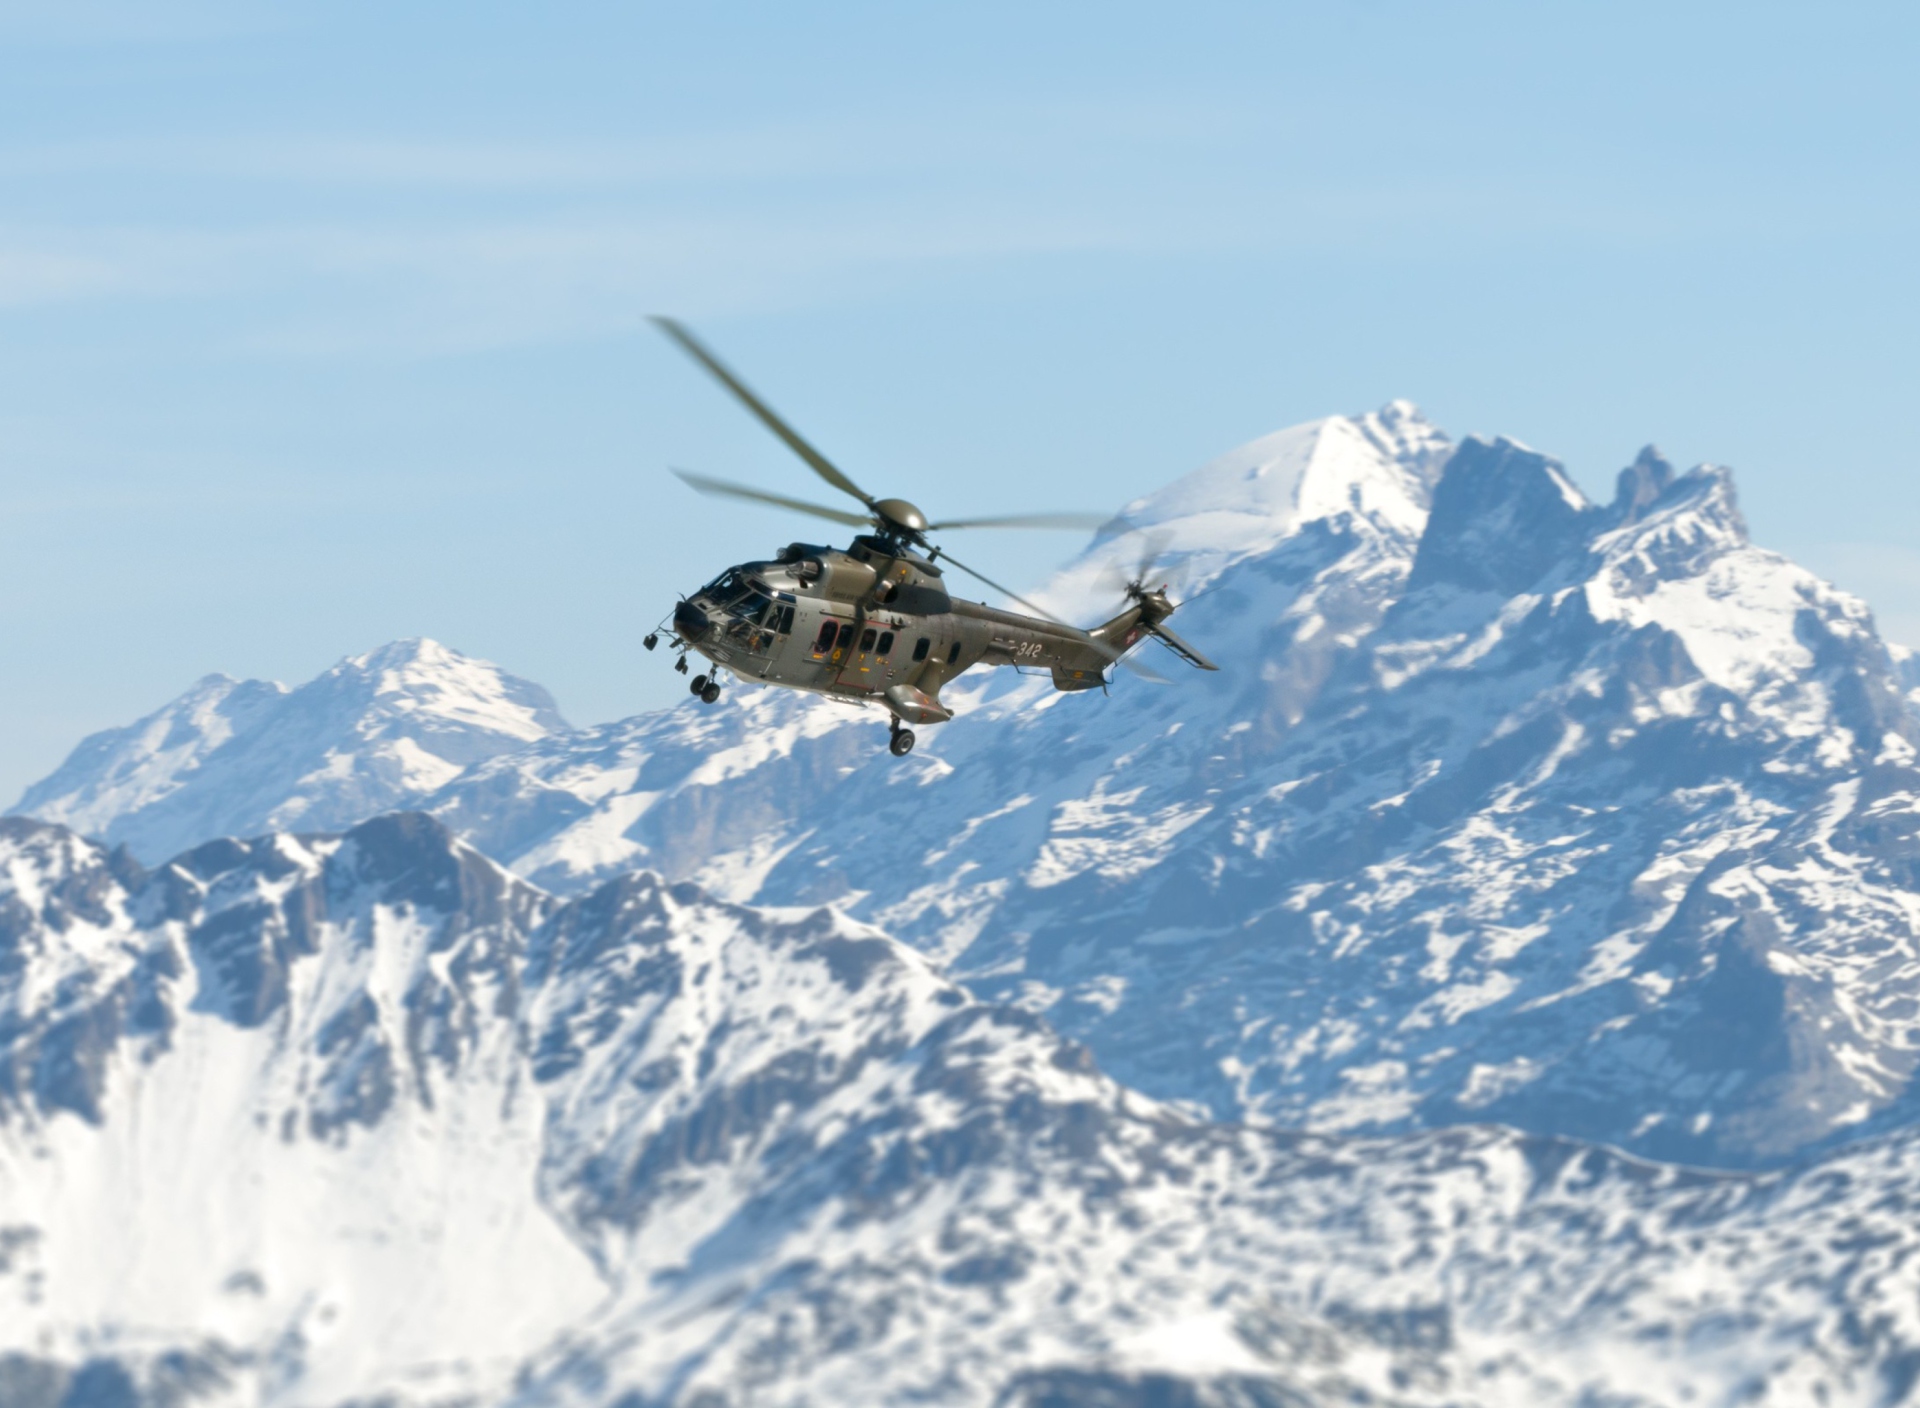 Das Helicopter Over Snowy Mountains Wallpaper 1920x1408